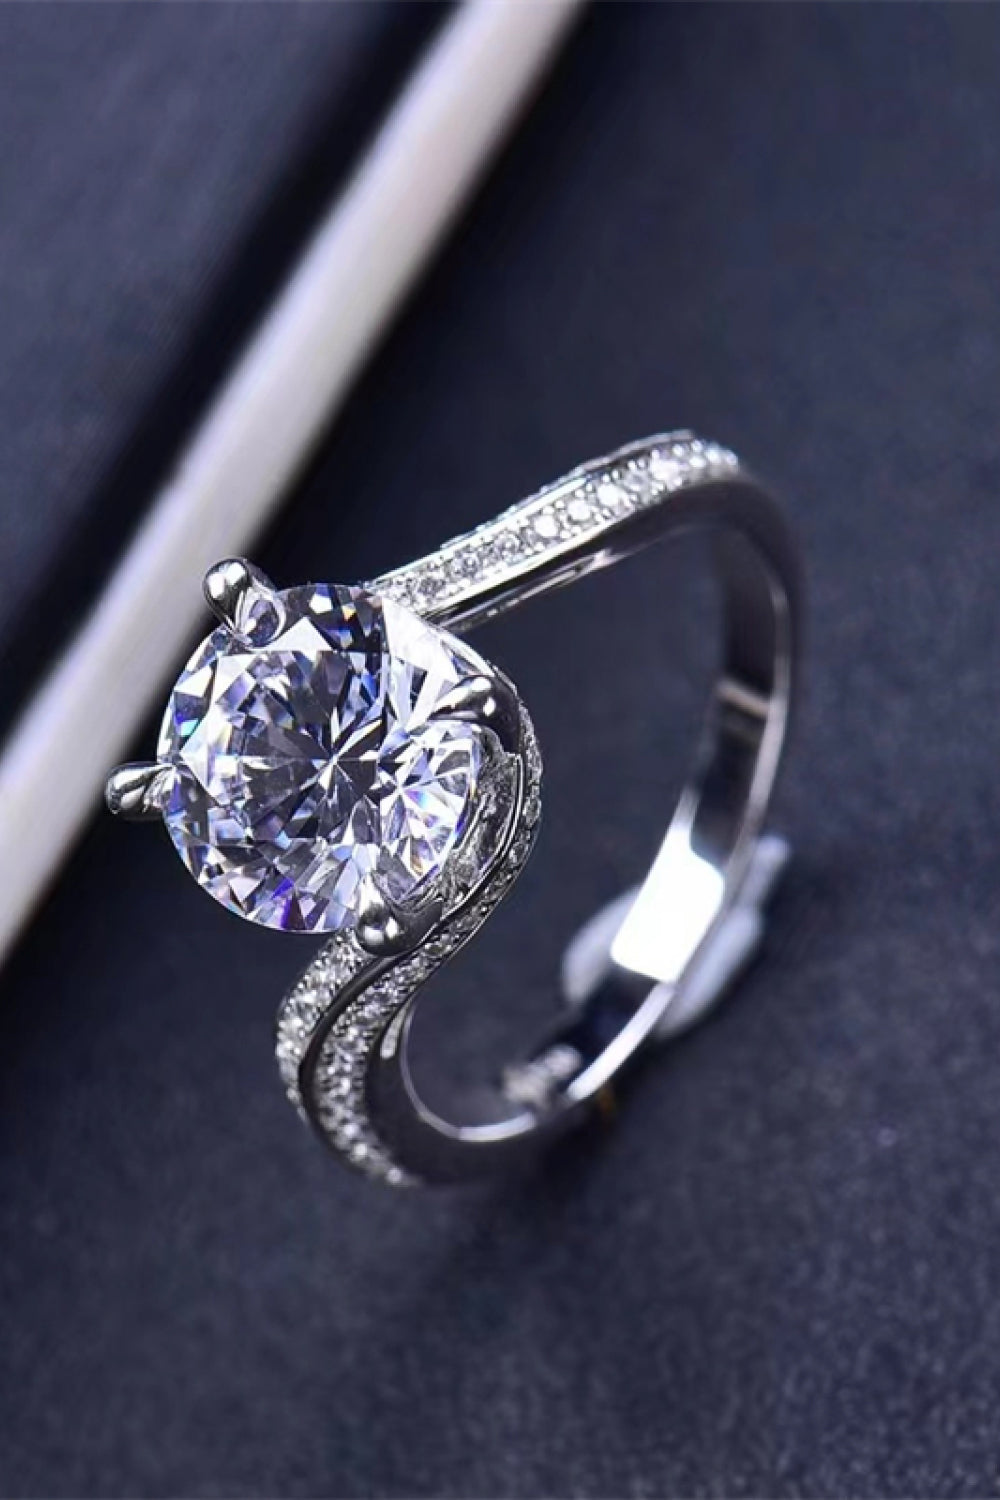 Keep Your Eyes On Me 3 Carat Moissanite Ring - Tophatter Deals